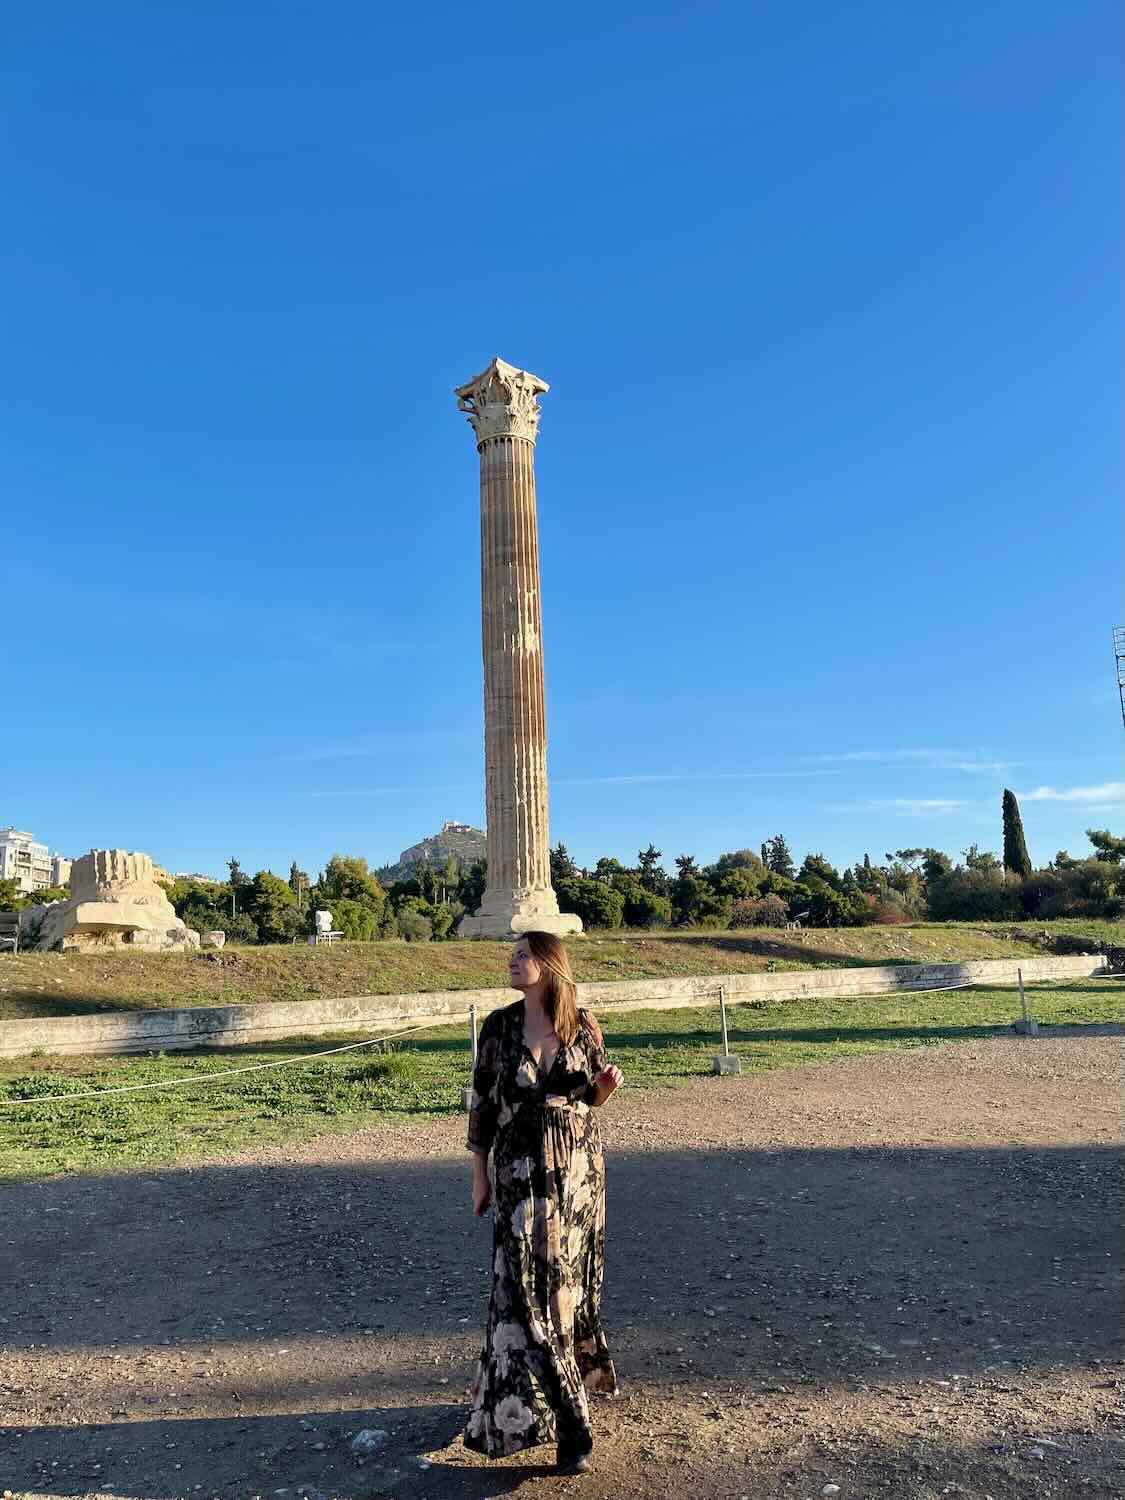 A woman in a floral dress and sun hat standing in front of a single standing column of the Temple of Olympian Zeus in Athens, with a clear blue sky in the background.